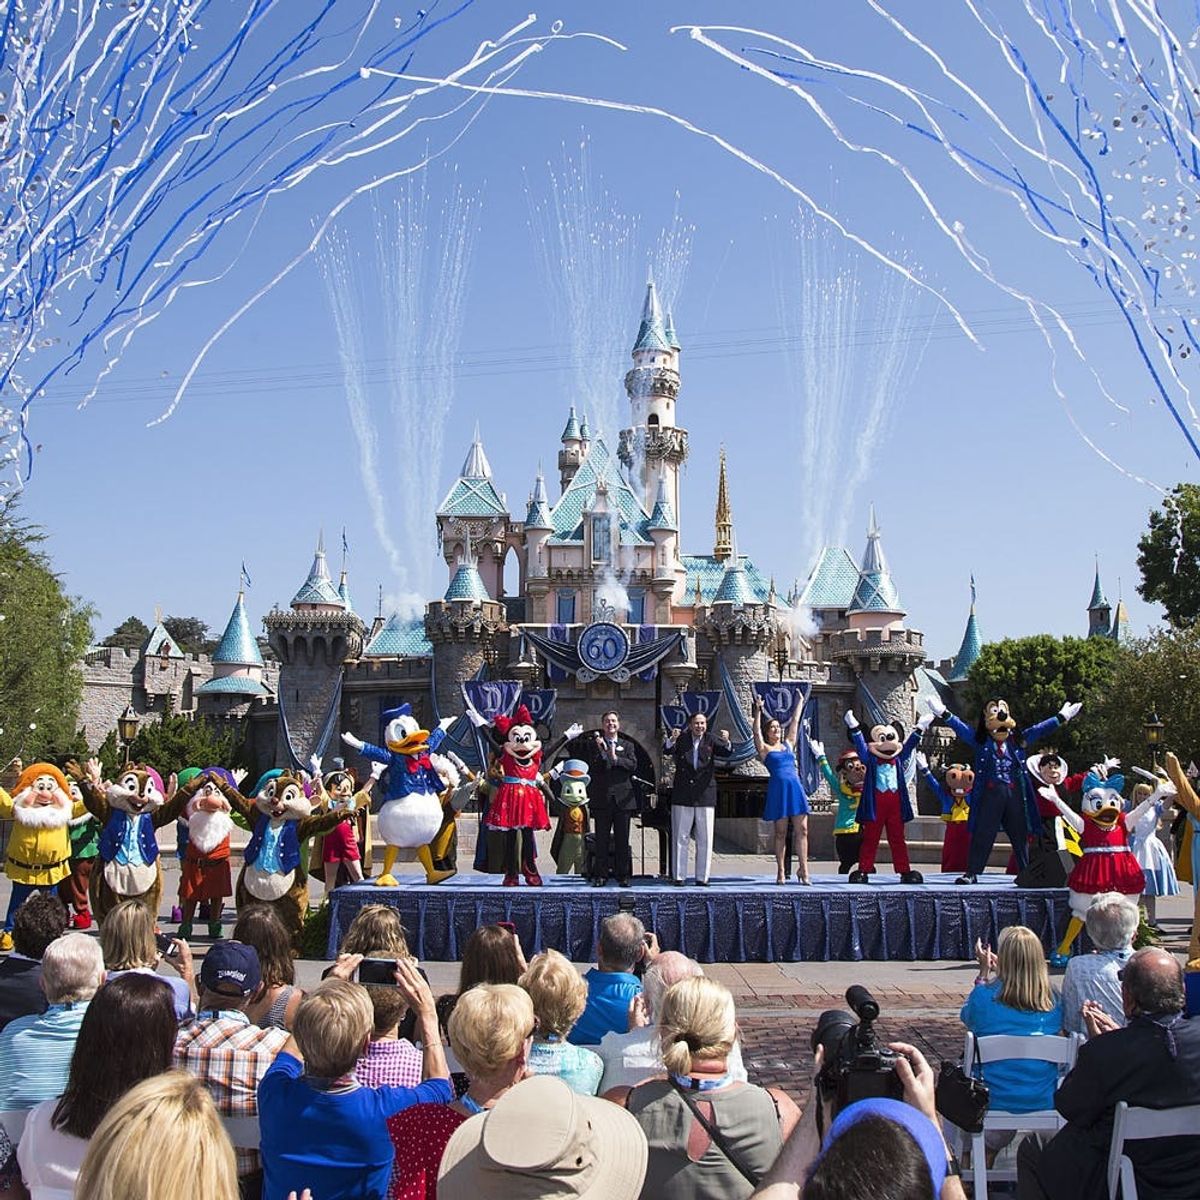 People Are Waiting in Long Lines to Get Their Hands on This Viral Disneyland Treat